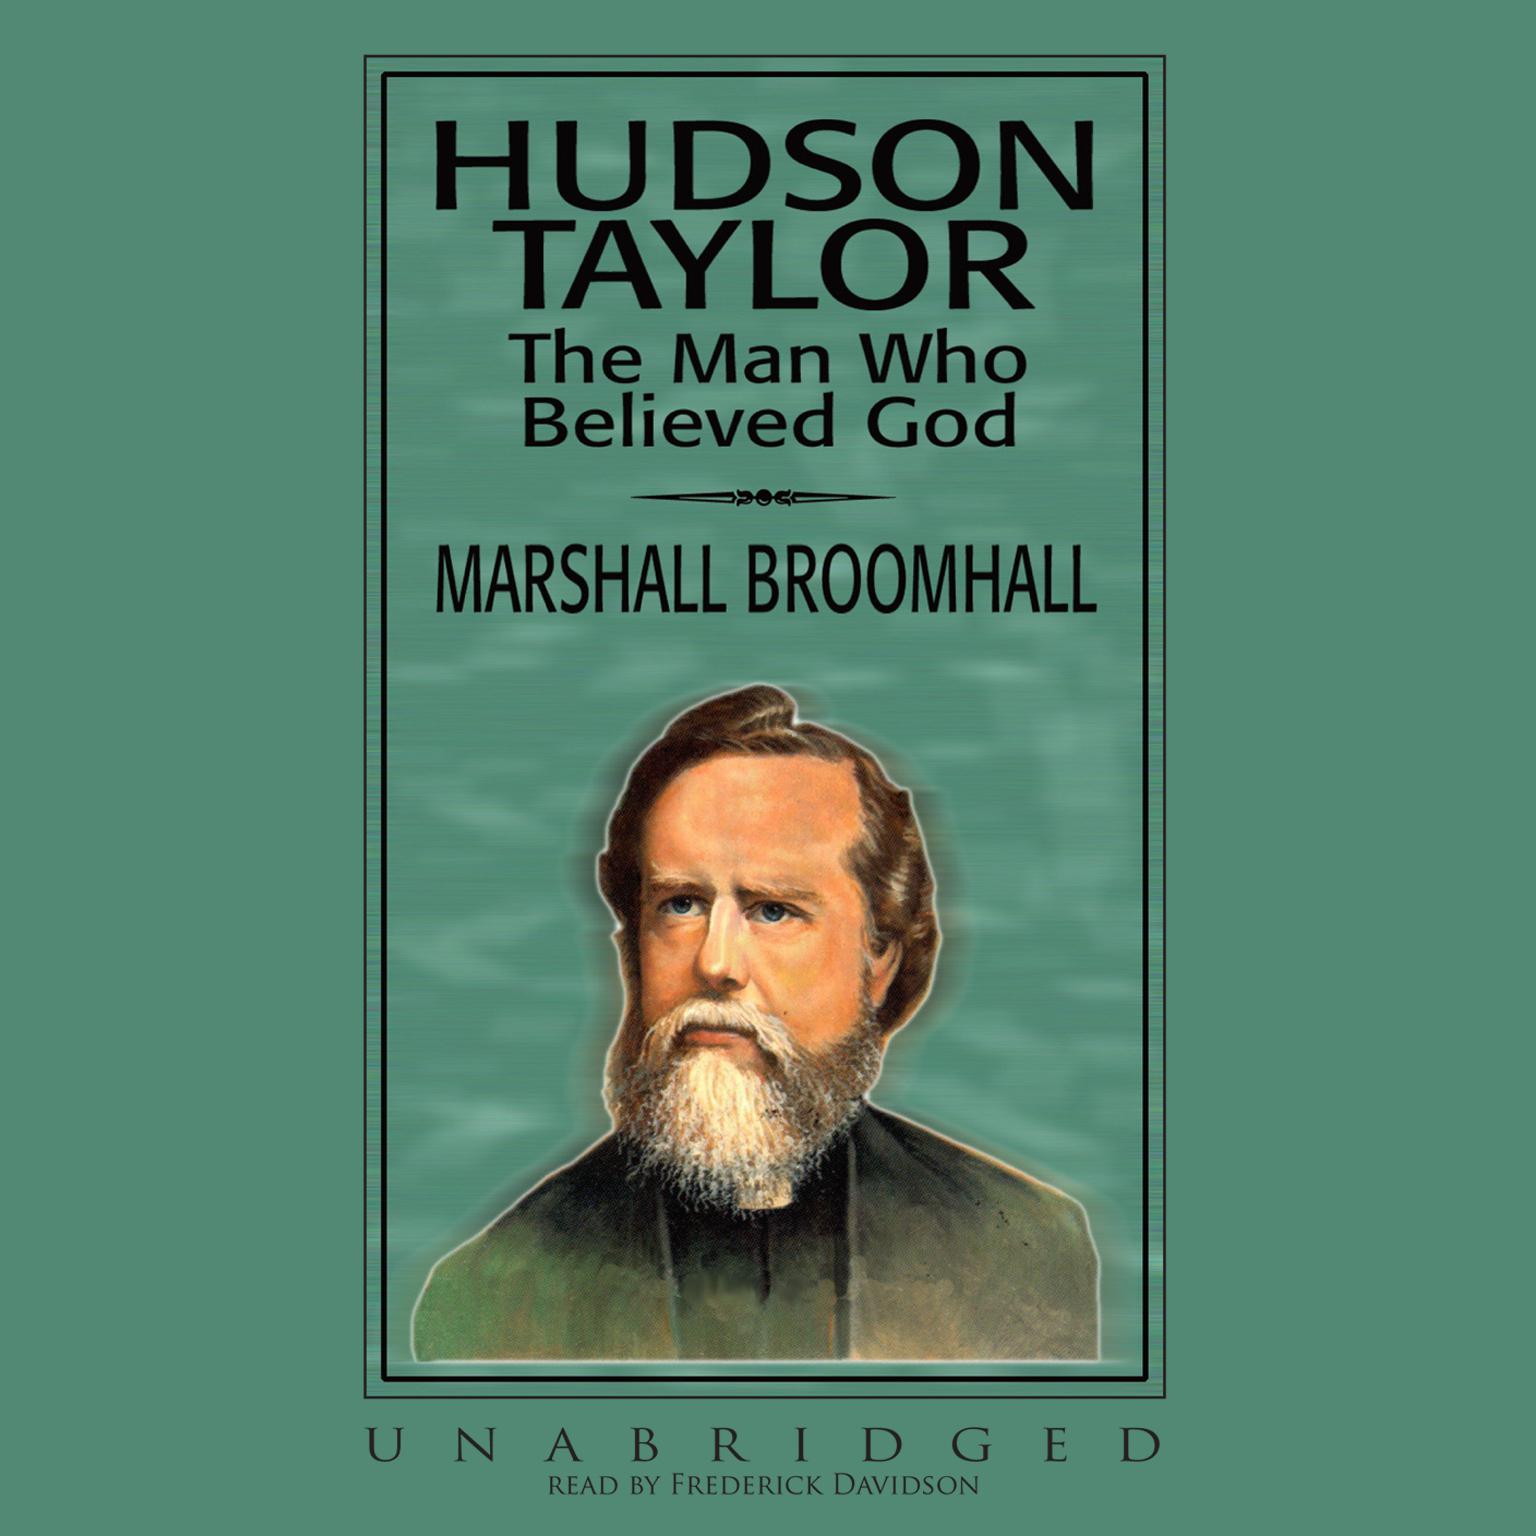 Hudson Taylor: The Man Who Believed God Audiobook, by Marshall Broomhall